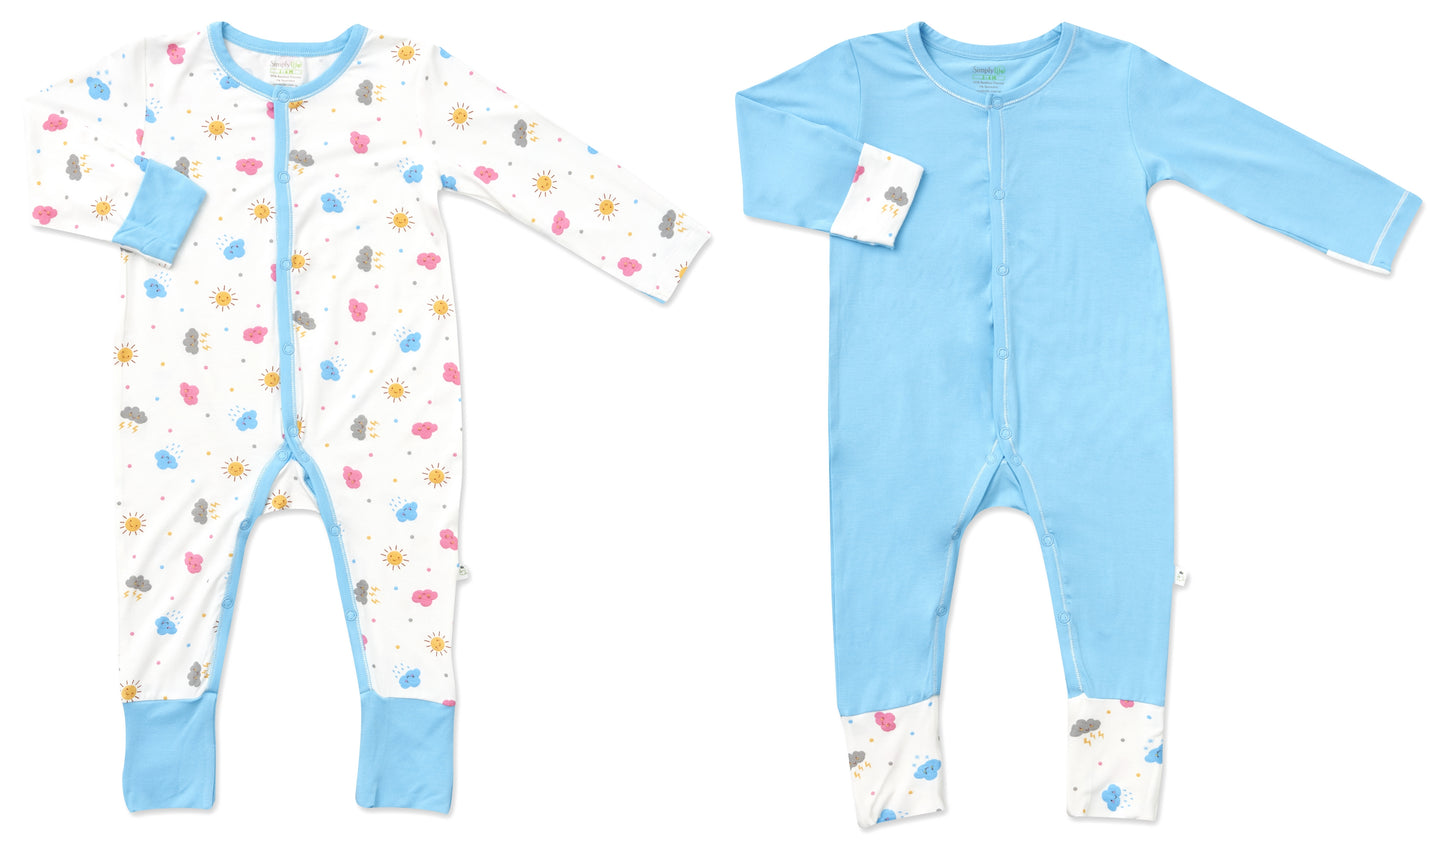 Weather & Blue - Long-sleeved Snap Button Sleepsuit with Convertible Cuffs / Mittens & Footie (Value Pack of 2)